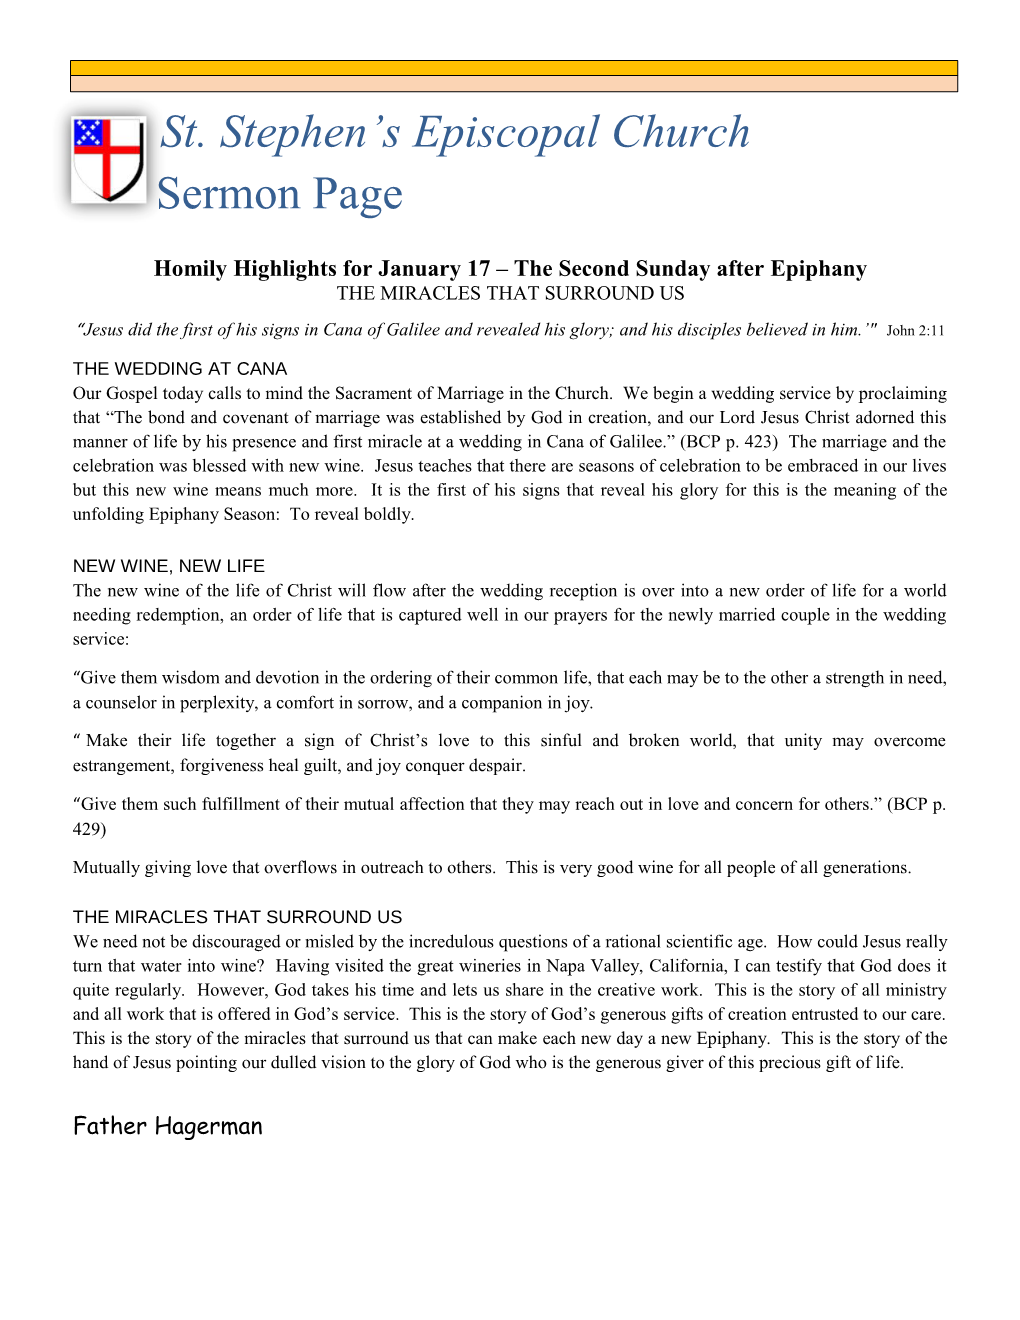 Homily Highlights for January 17 the Second Sunday After Epiphany